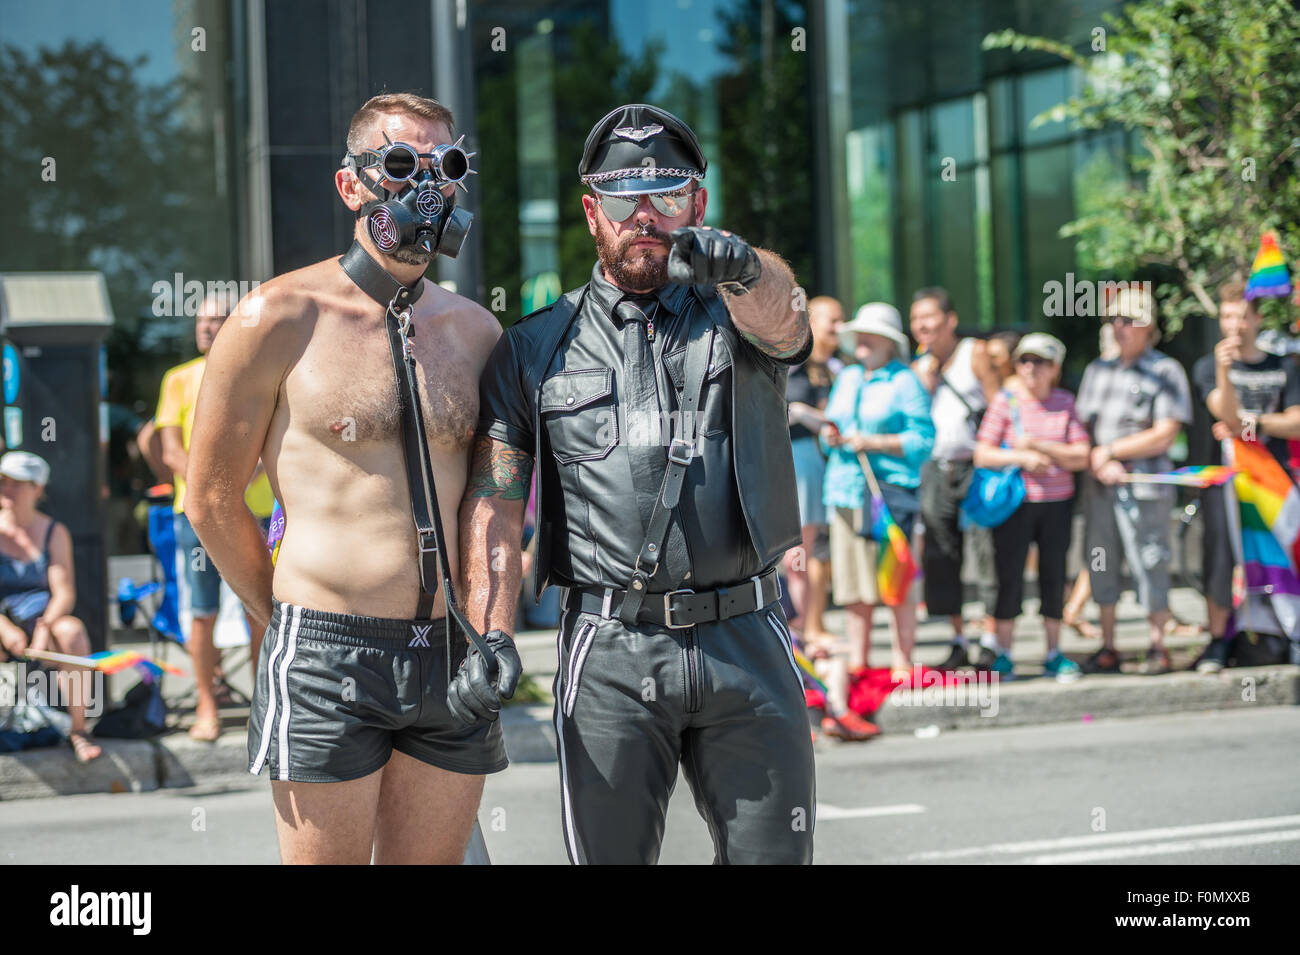 MONTREAL, CANADA, 16th August 2015. A BDSM master and his slave pose at the  2015 Gay Pride Parade in Montreal. © Marc Bruxelle/Alamy Live News Stock  Photo - Alamy